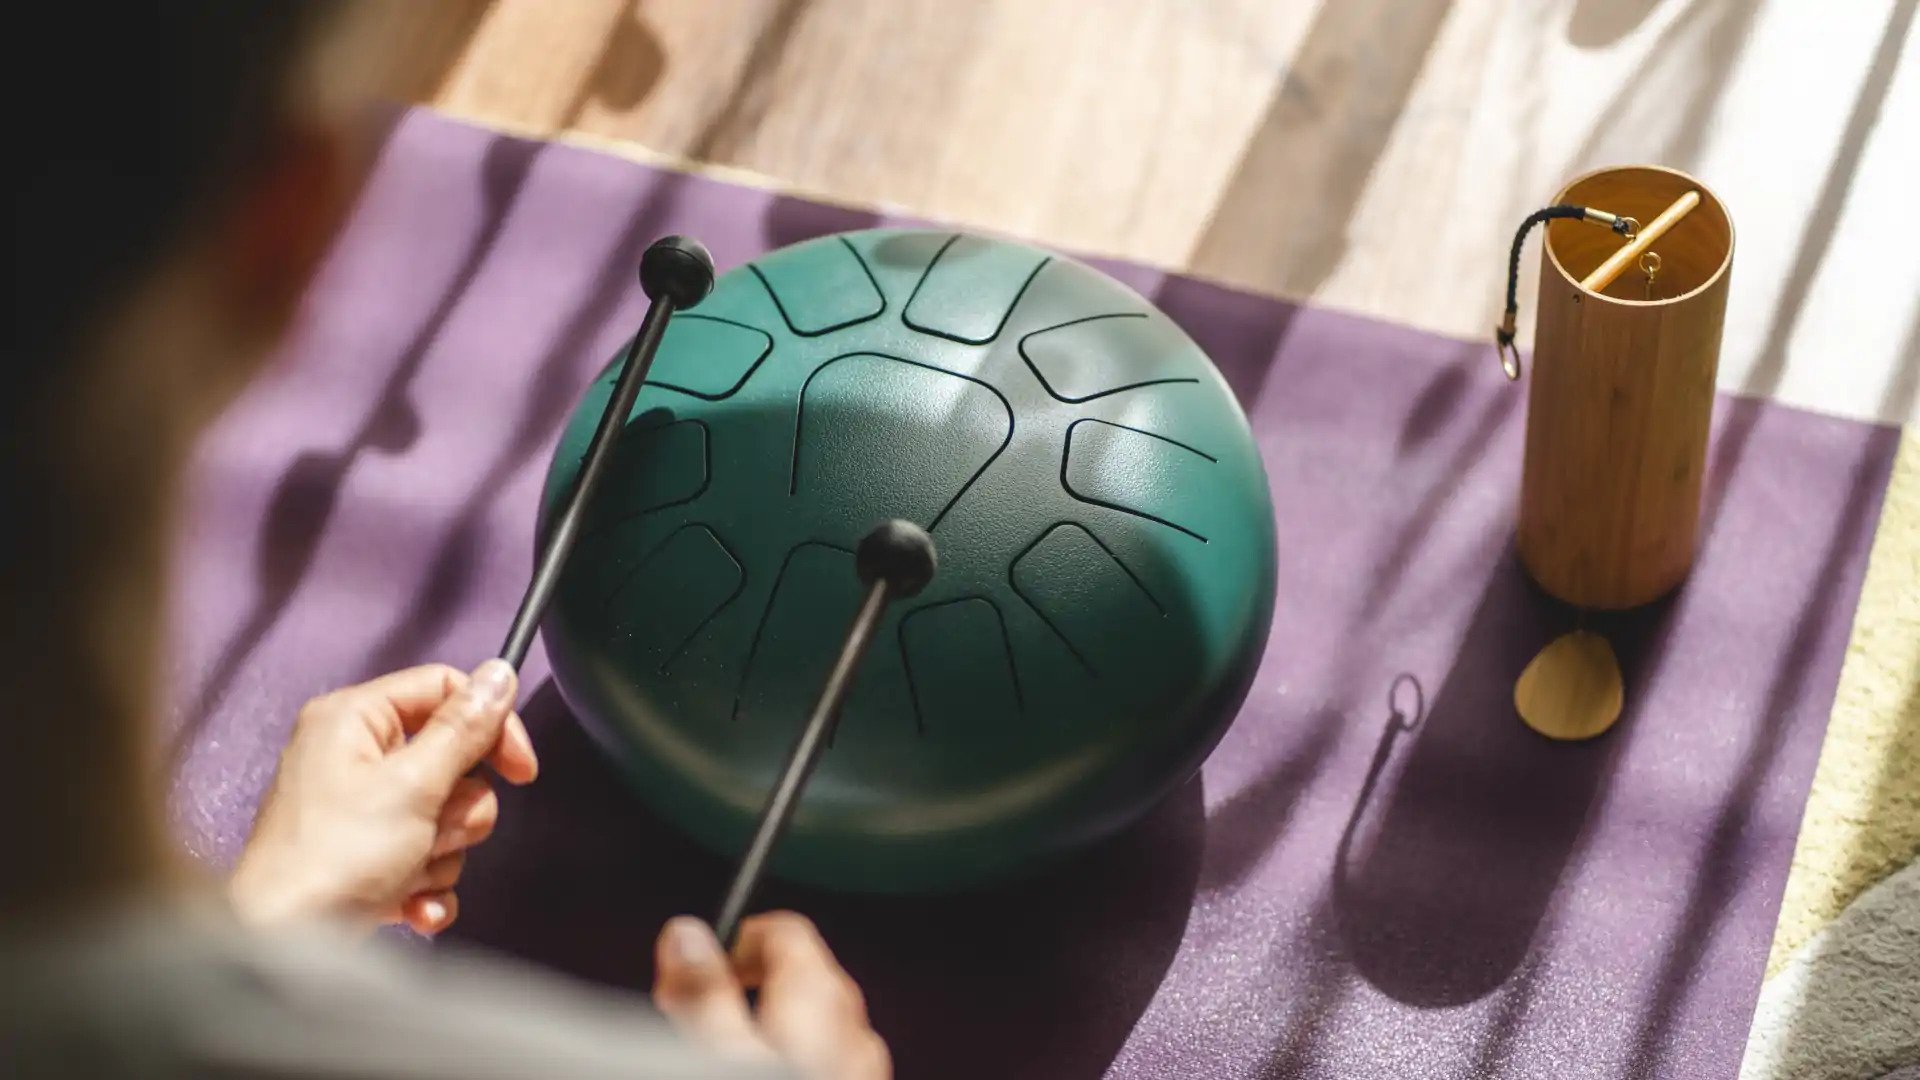 WHAT IF THE SOUND OF THE TONGUE DRUM HELPED YOU HEAL?